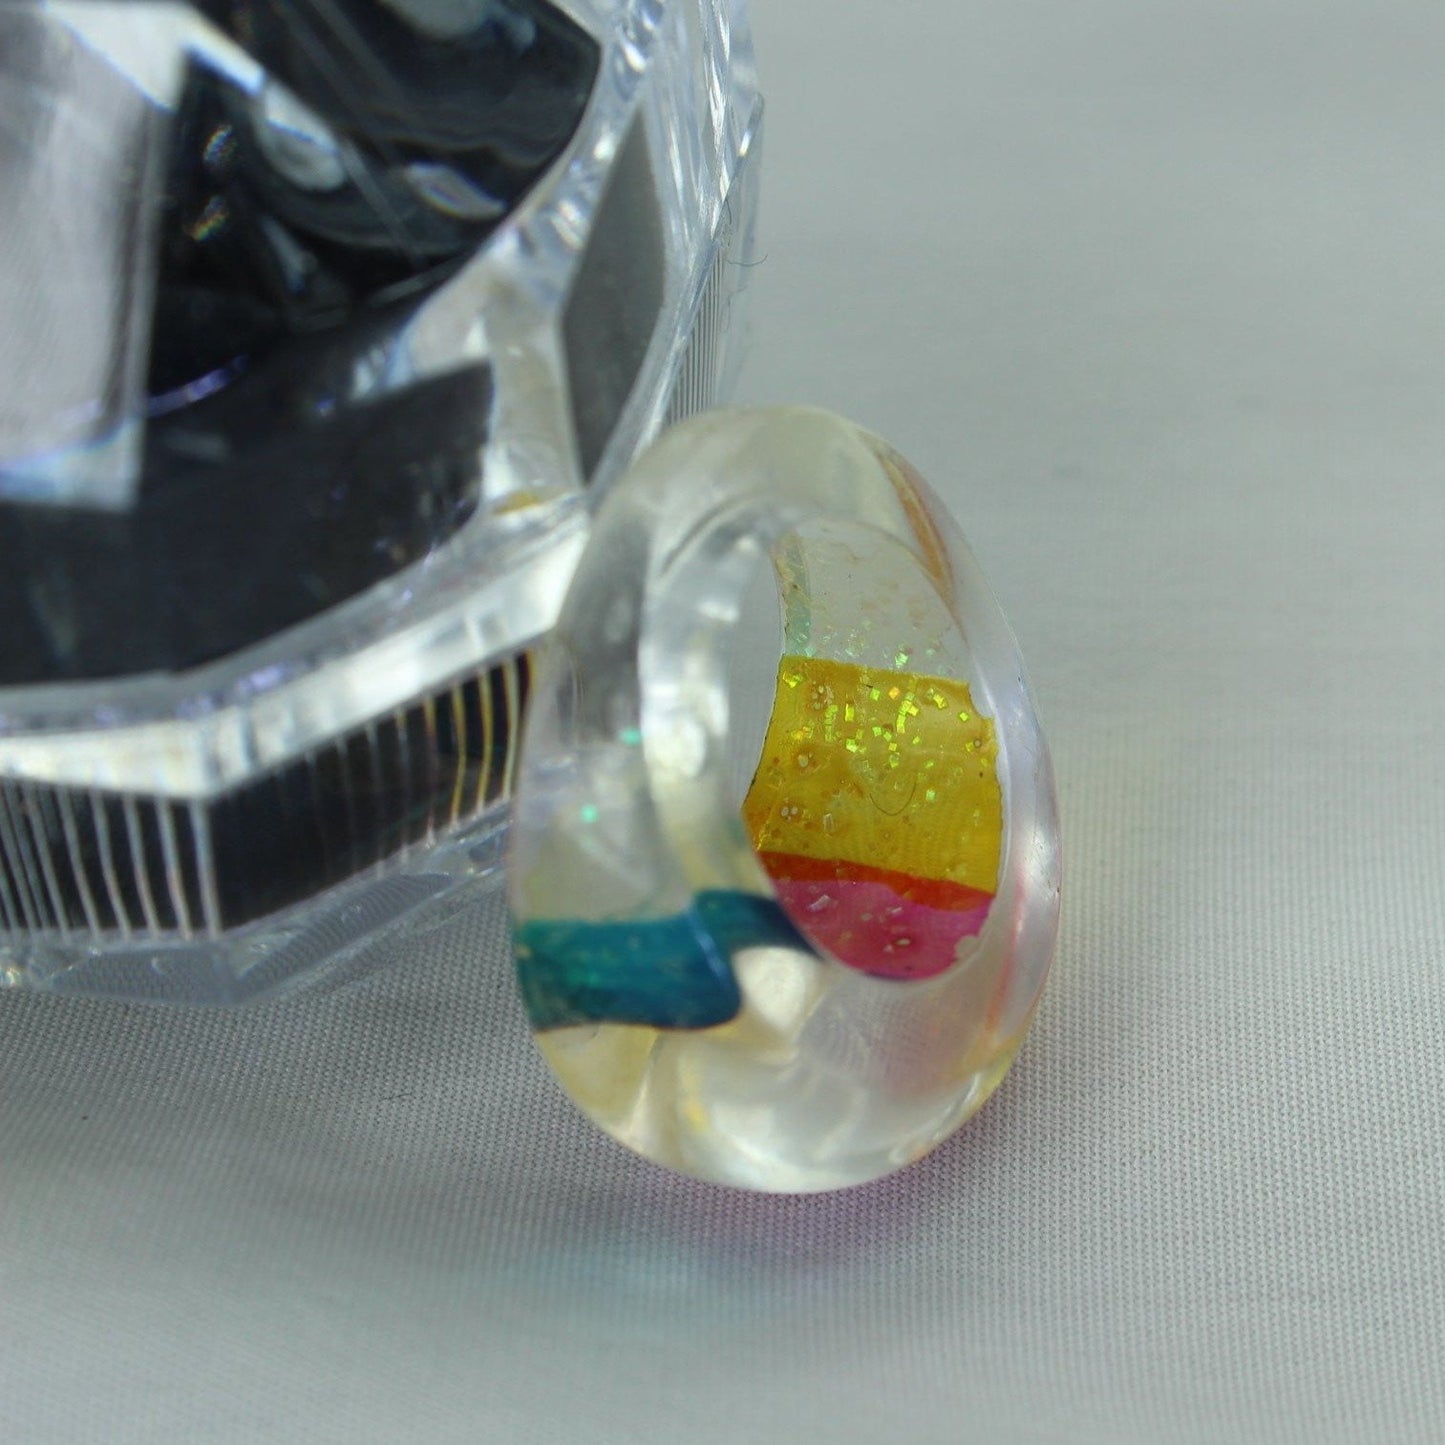 Vintage Lucite Ring Rainbow Dome with Sparkles Clear Blue Yellow Pink vibrant